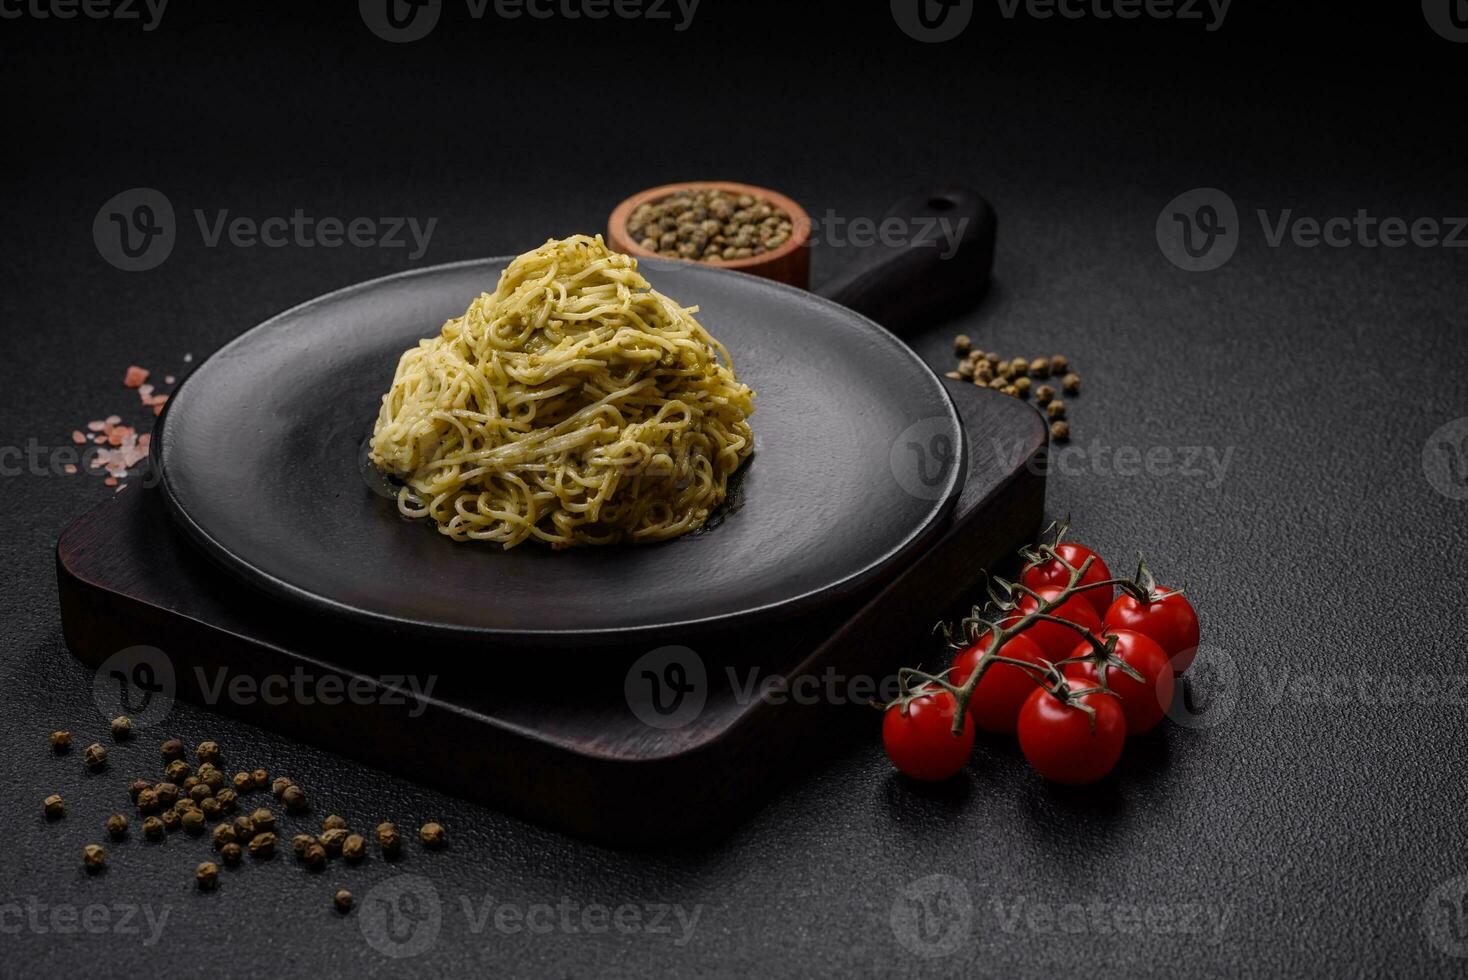 Capellini pasta or noodles with pesto sauce, salt and spices photo